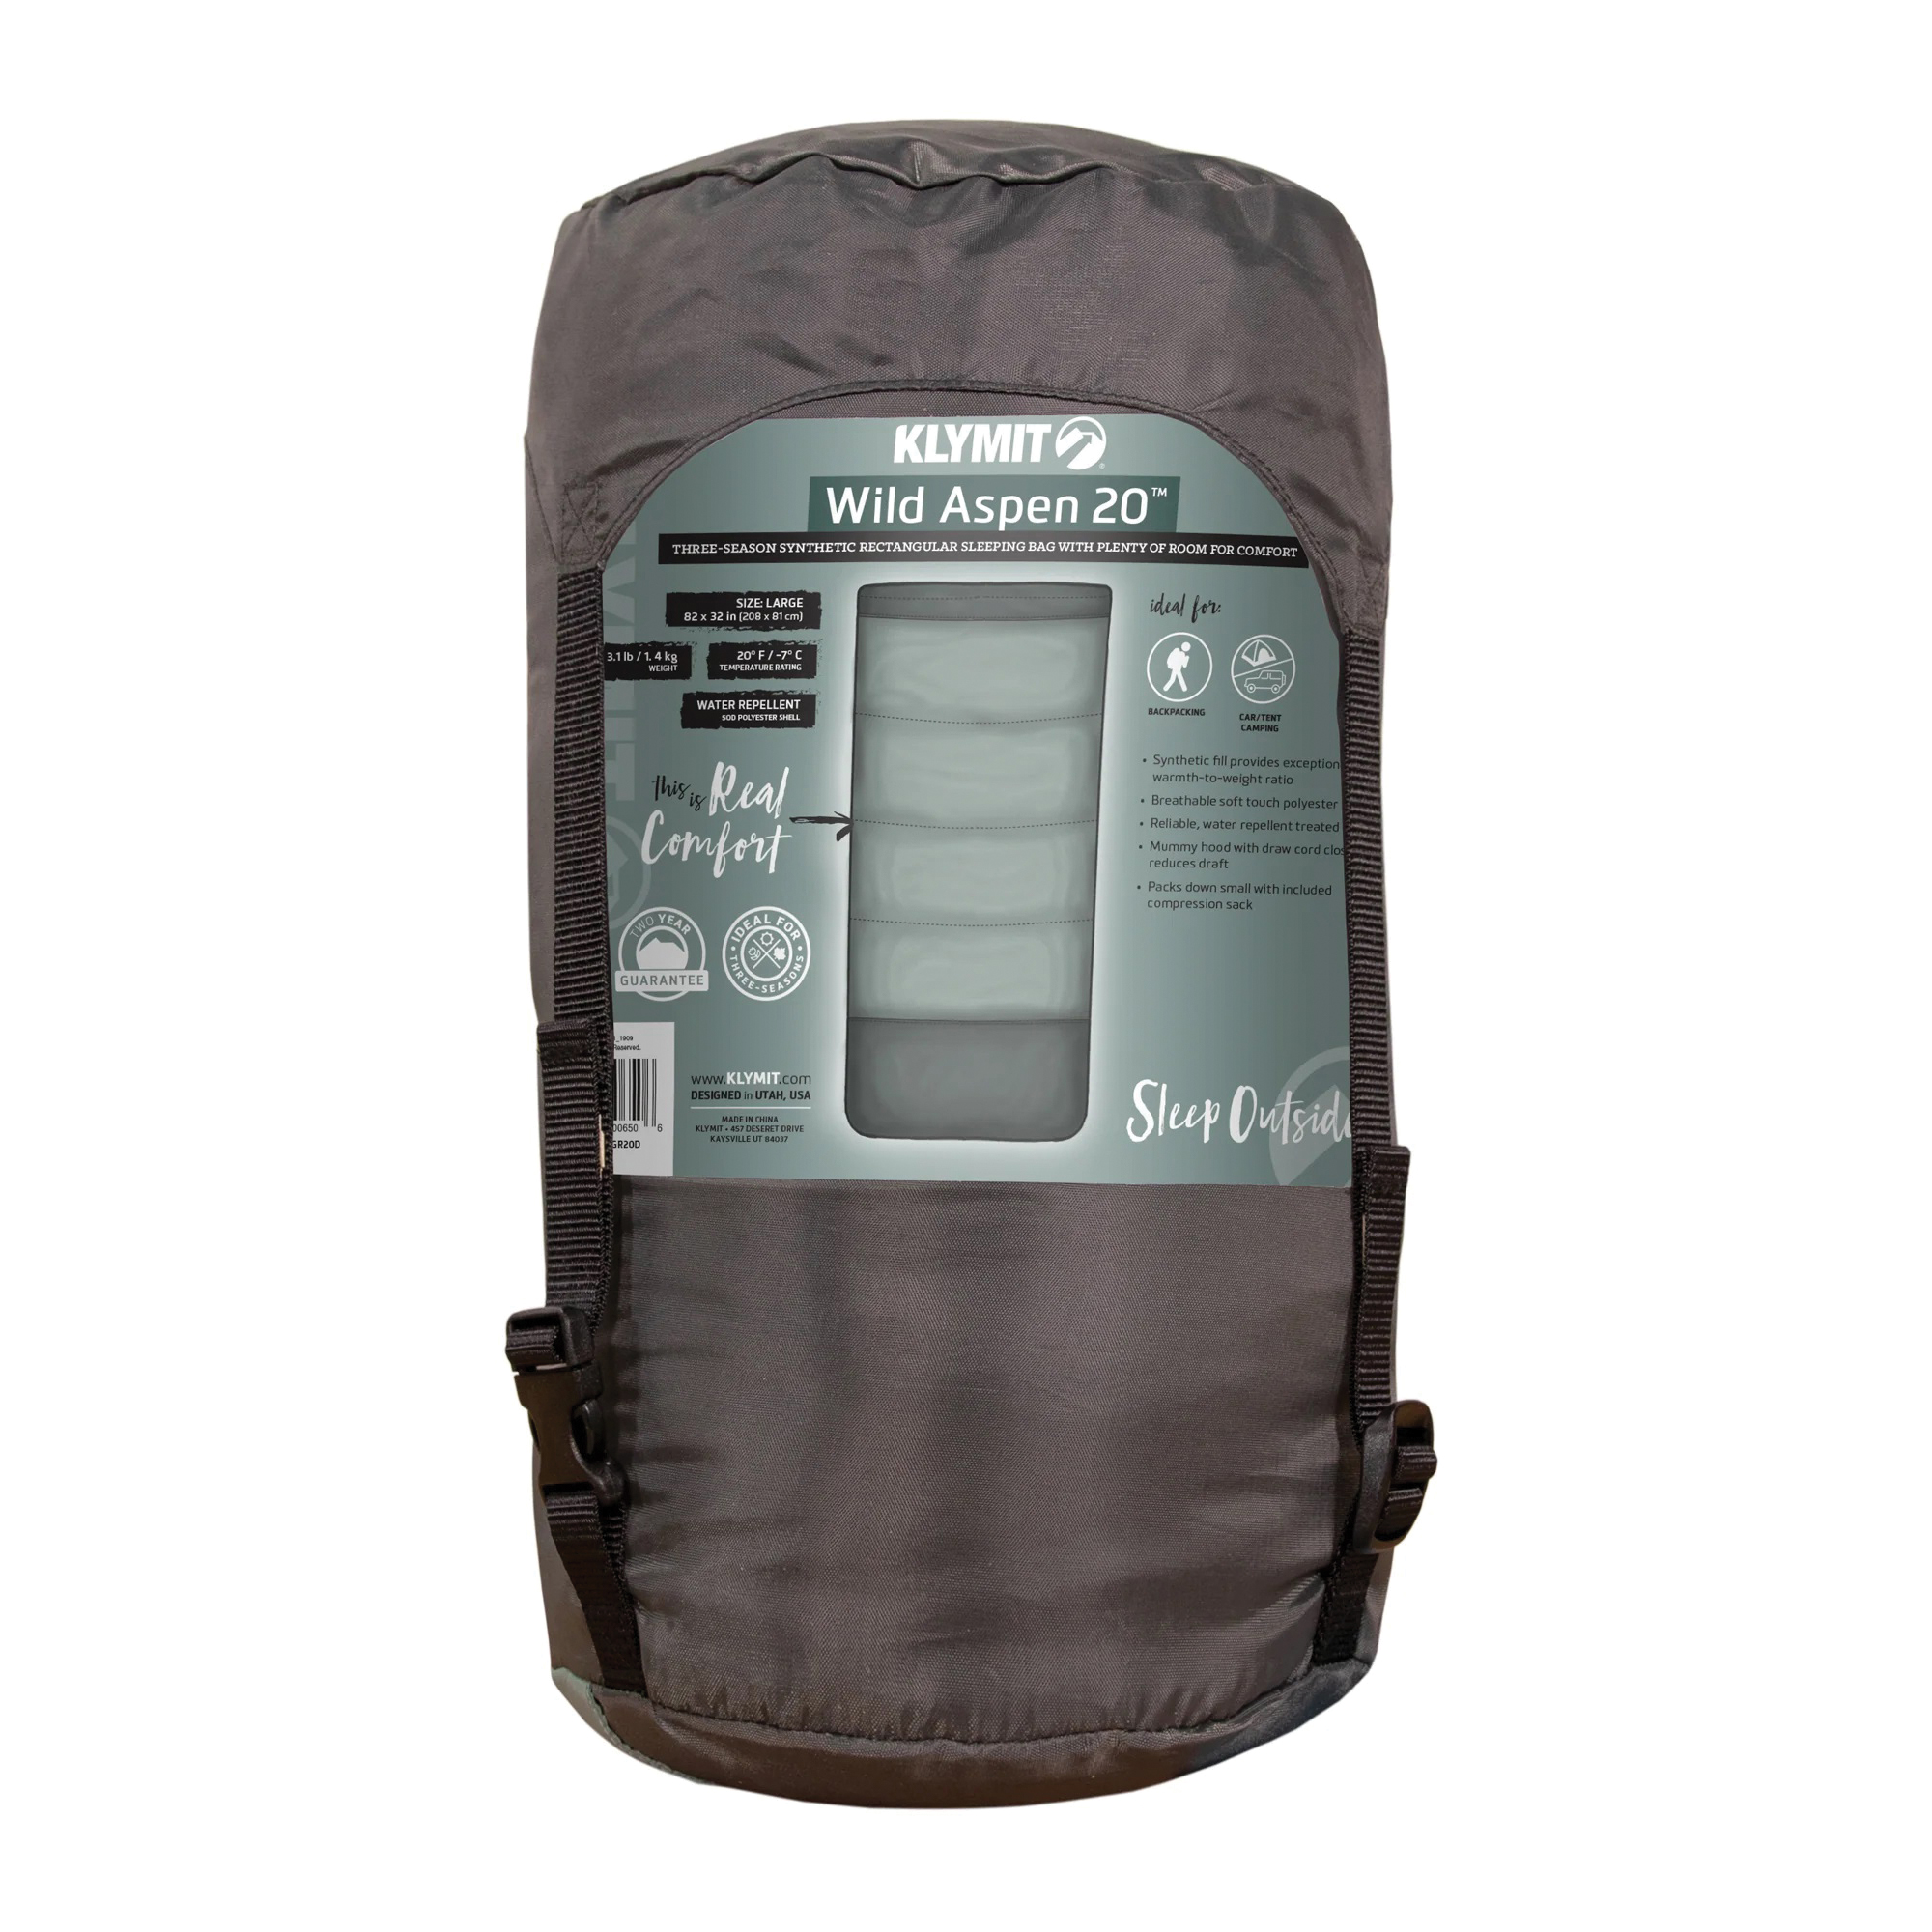 Klymit Wold Aspen 20 13WRGR20D Sleeping Bag, 74 in L, 34 in W, Rectangle, Polyester, Green - 3